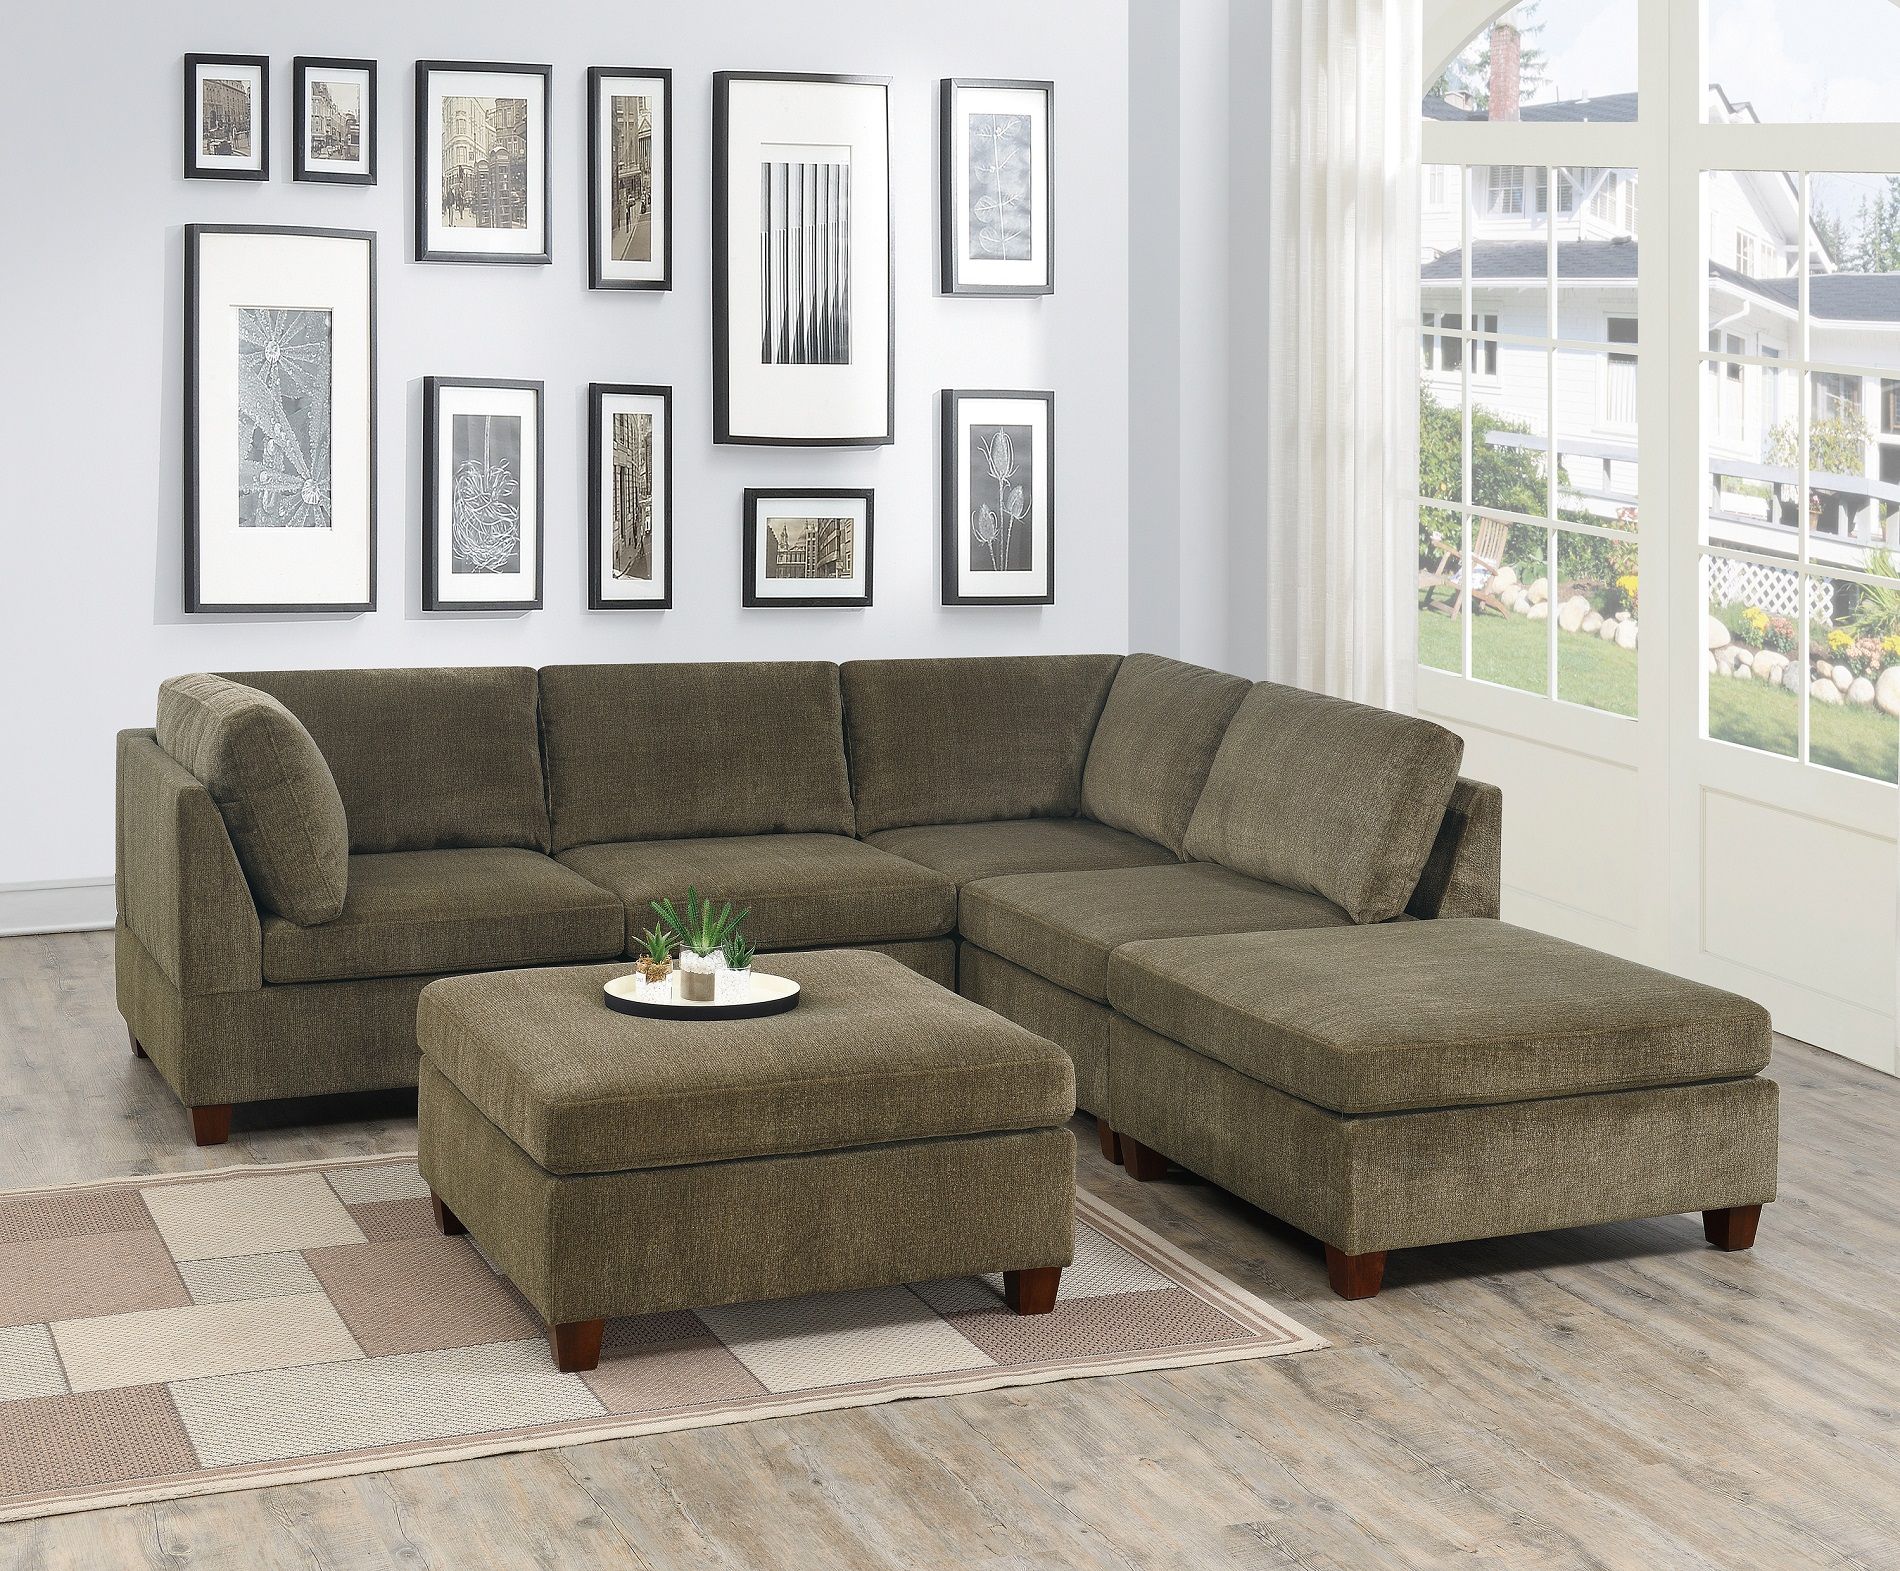 Contemporary Modern Unique Modular 6pc Sectional Sofa Set With Mireille Modern And Contemporary Fabric Upholstered Sectional Sofas (View 1 of 15)